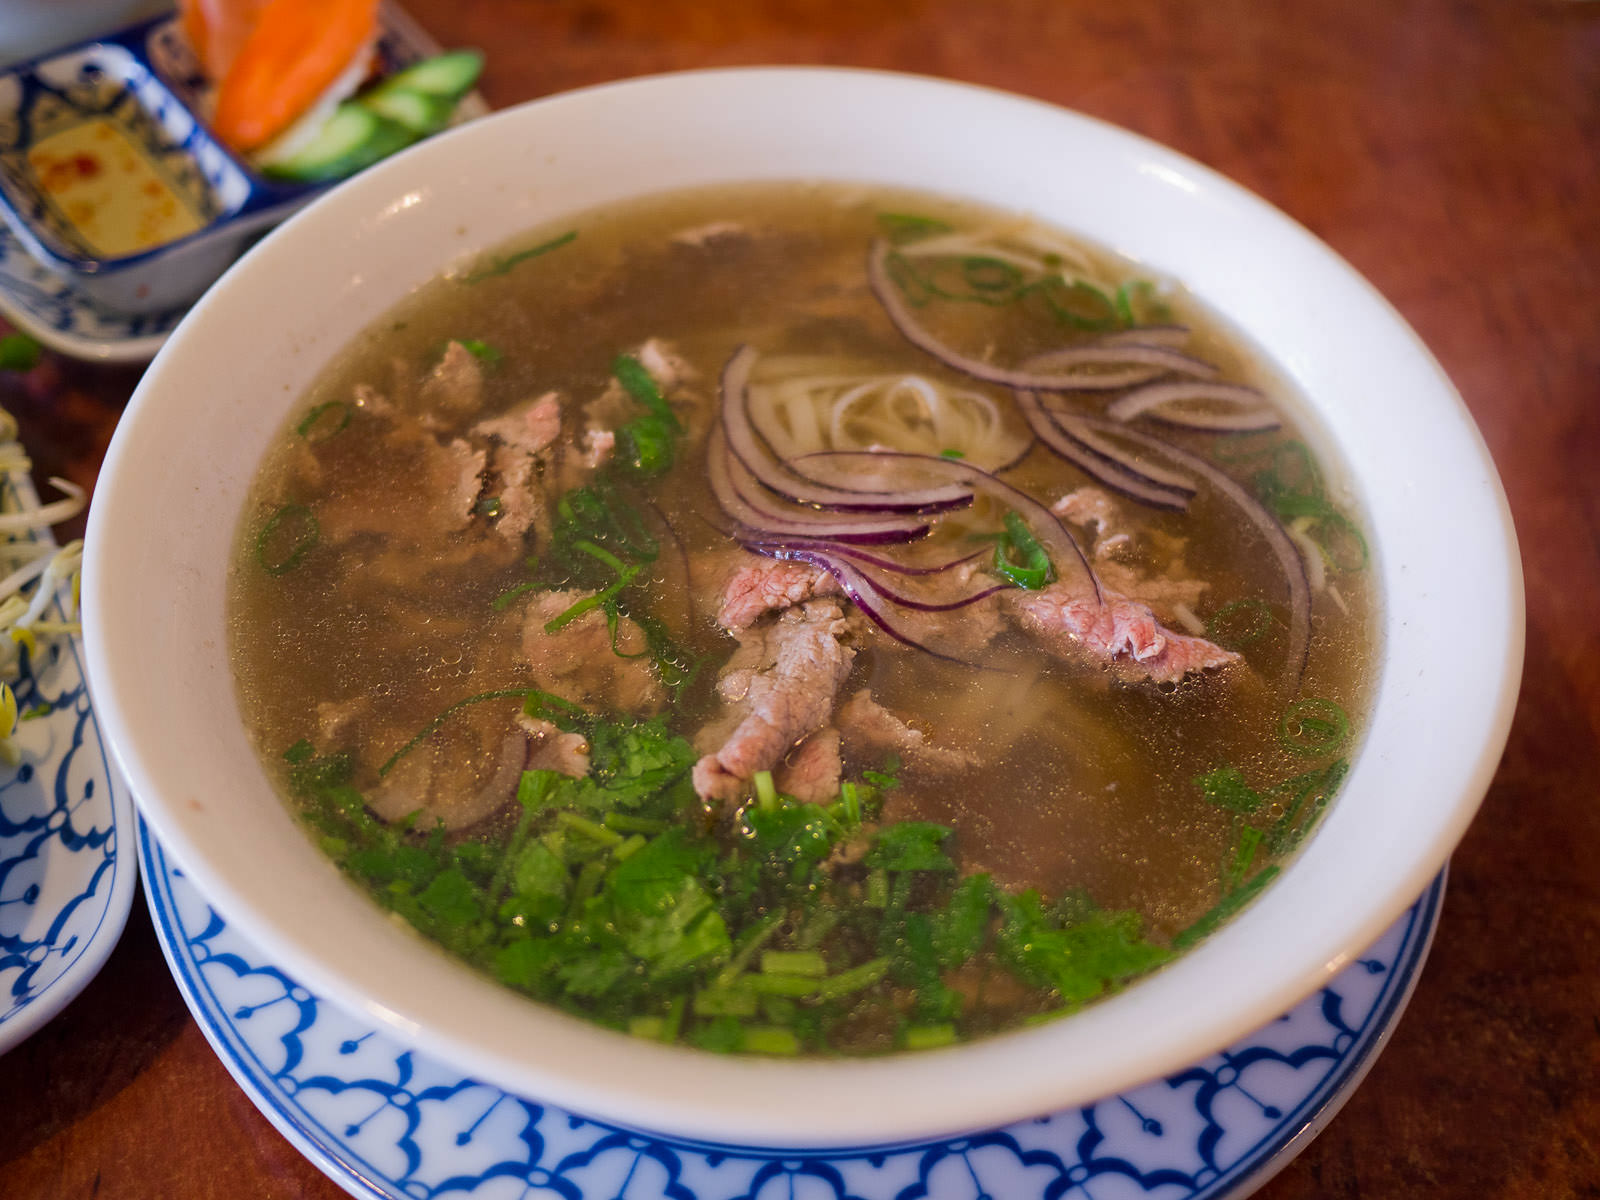 Pho tai (thinly sliced beef with rice noodle soup - AU$12.50)